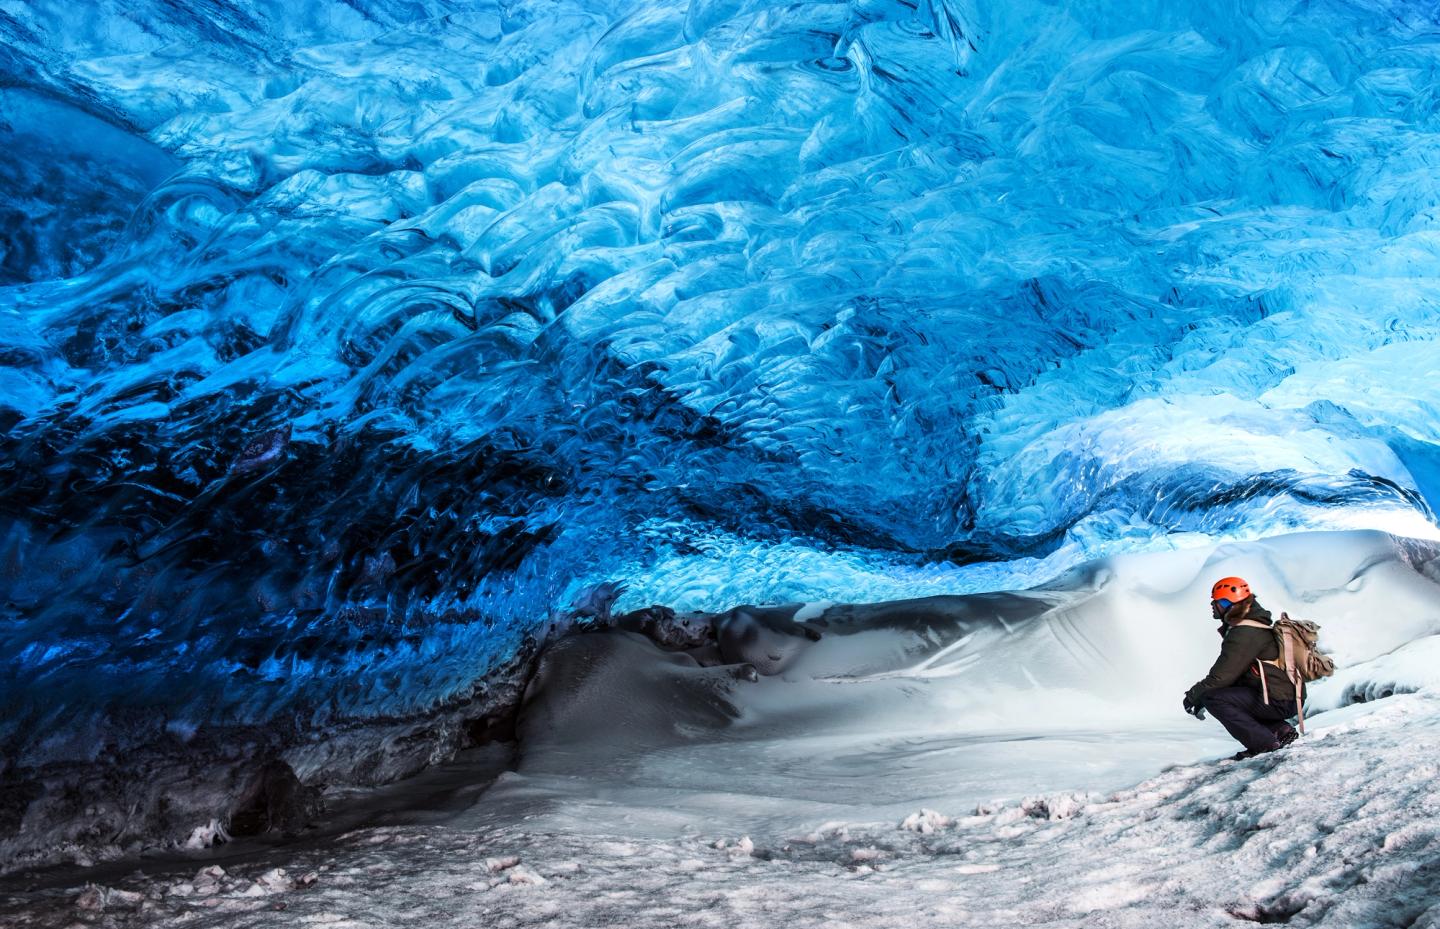 Glacier ice cave of Iceland